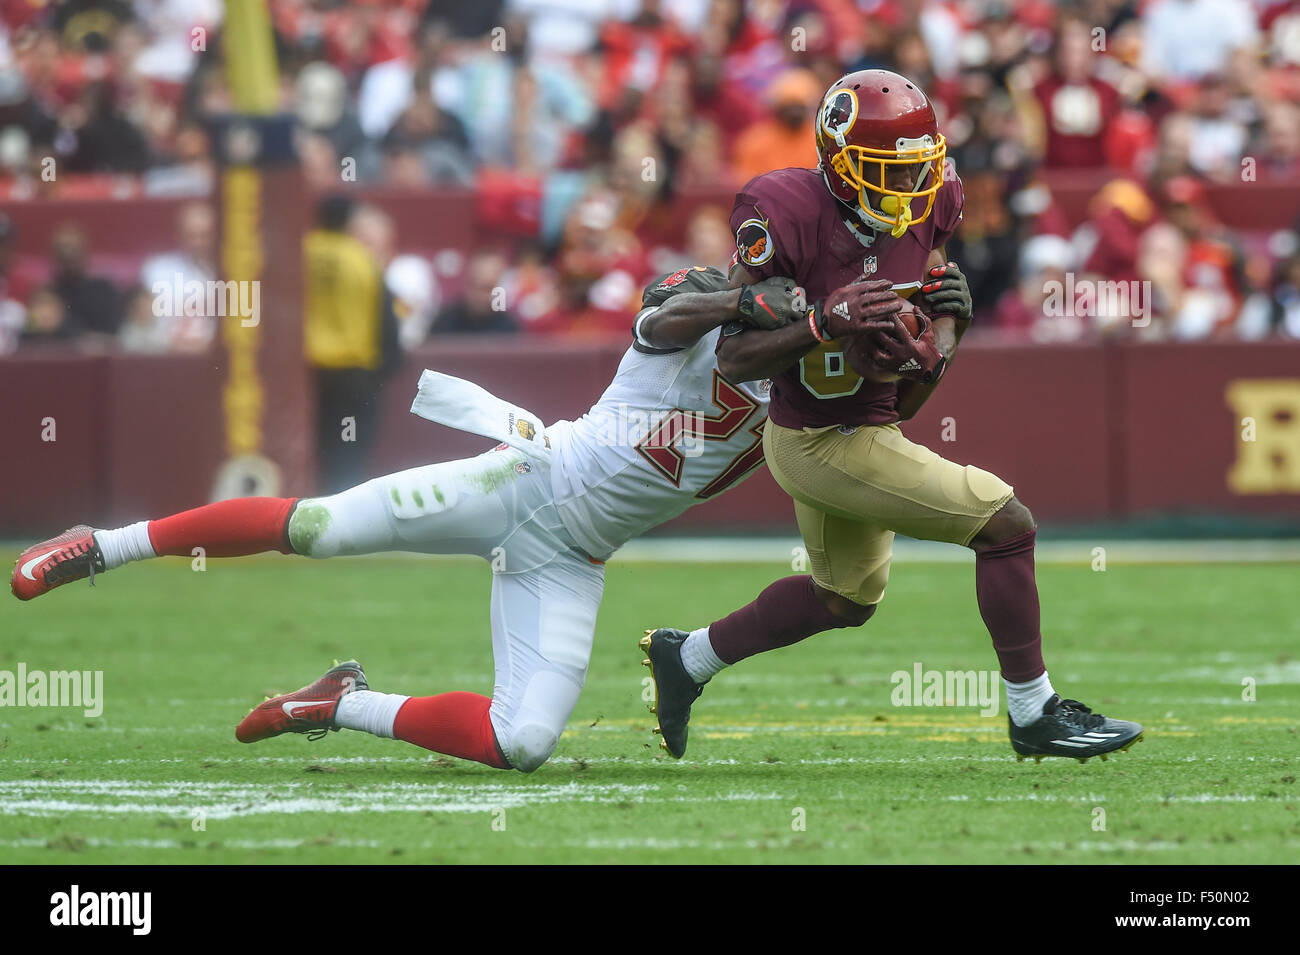 OCT 25, 2015 : Tampa Bay Buccaneers cornerback Alterraun Verner (21) tries to tackle Washington Redskins wide receiver Jamison Crowder (80) during the matchup between the Tampa Bay Buccaneers and the Washington Redskins at FedEx Field in Landover, MD. The Redskins came back from a halftime deficit of 24-7 to defeat the Buccaneers 31-30. Stock Photo